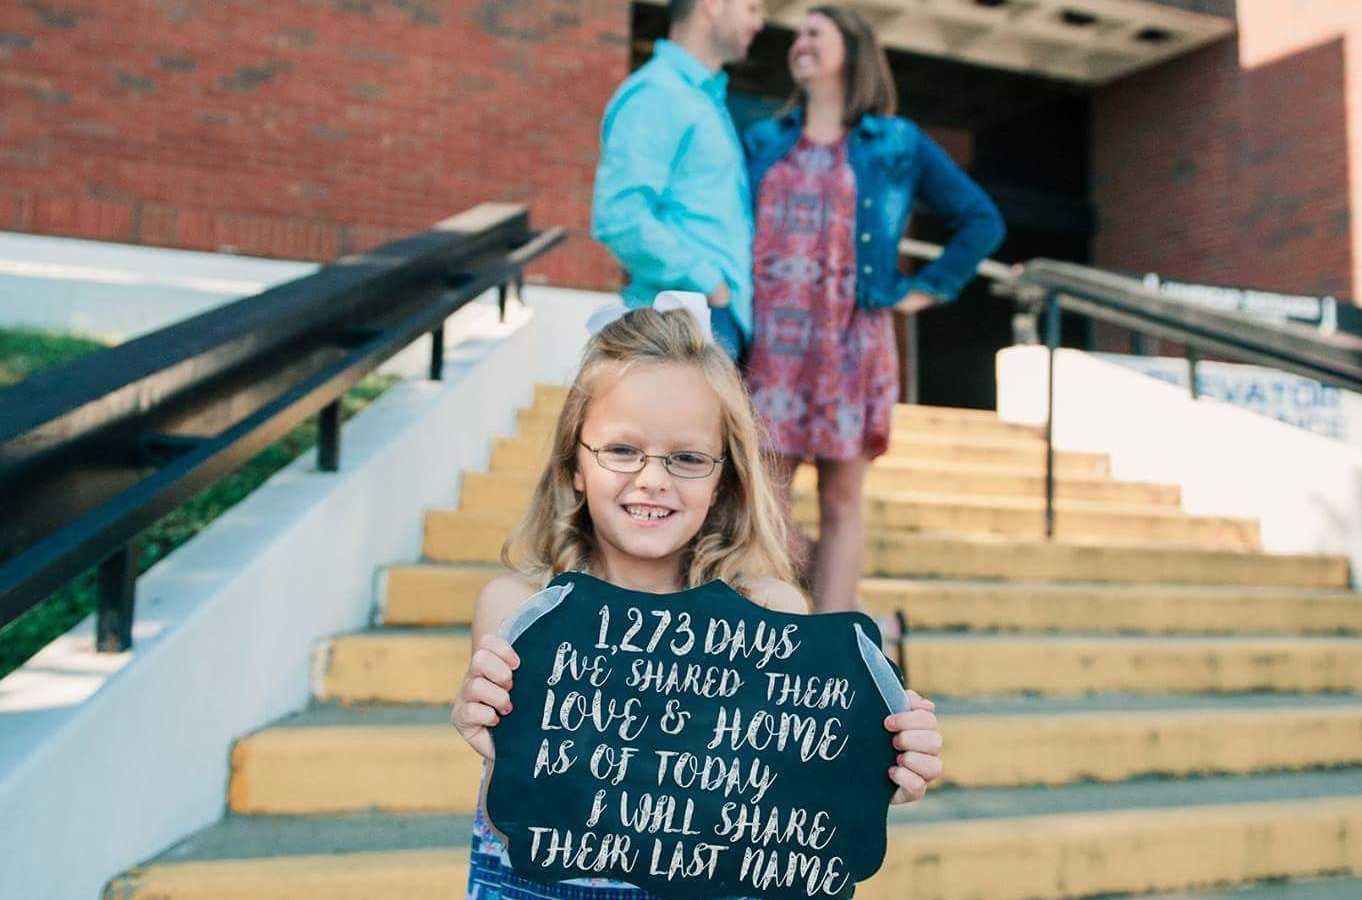 Little girl stands on steps holding sign saying "...as of today I will share their last name" with adopted parents standing behind her